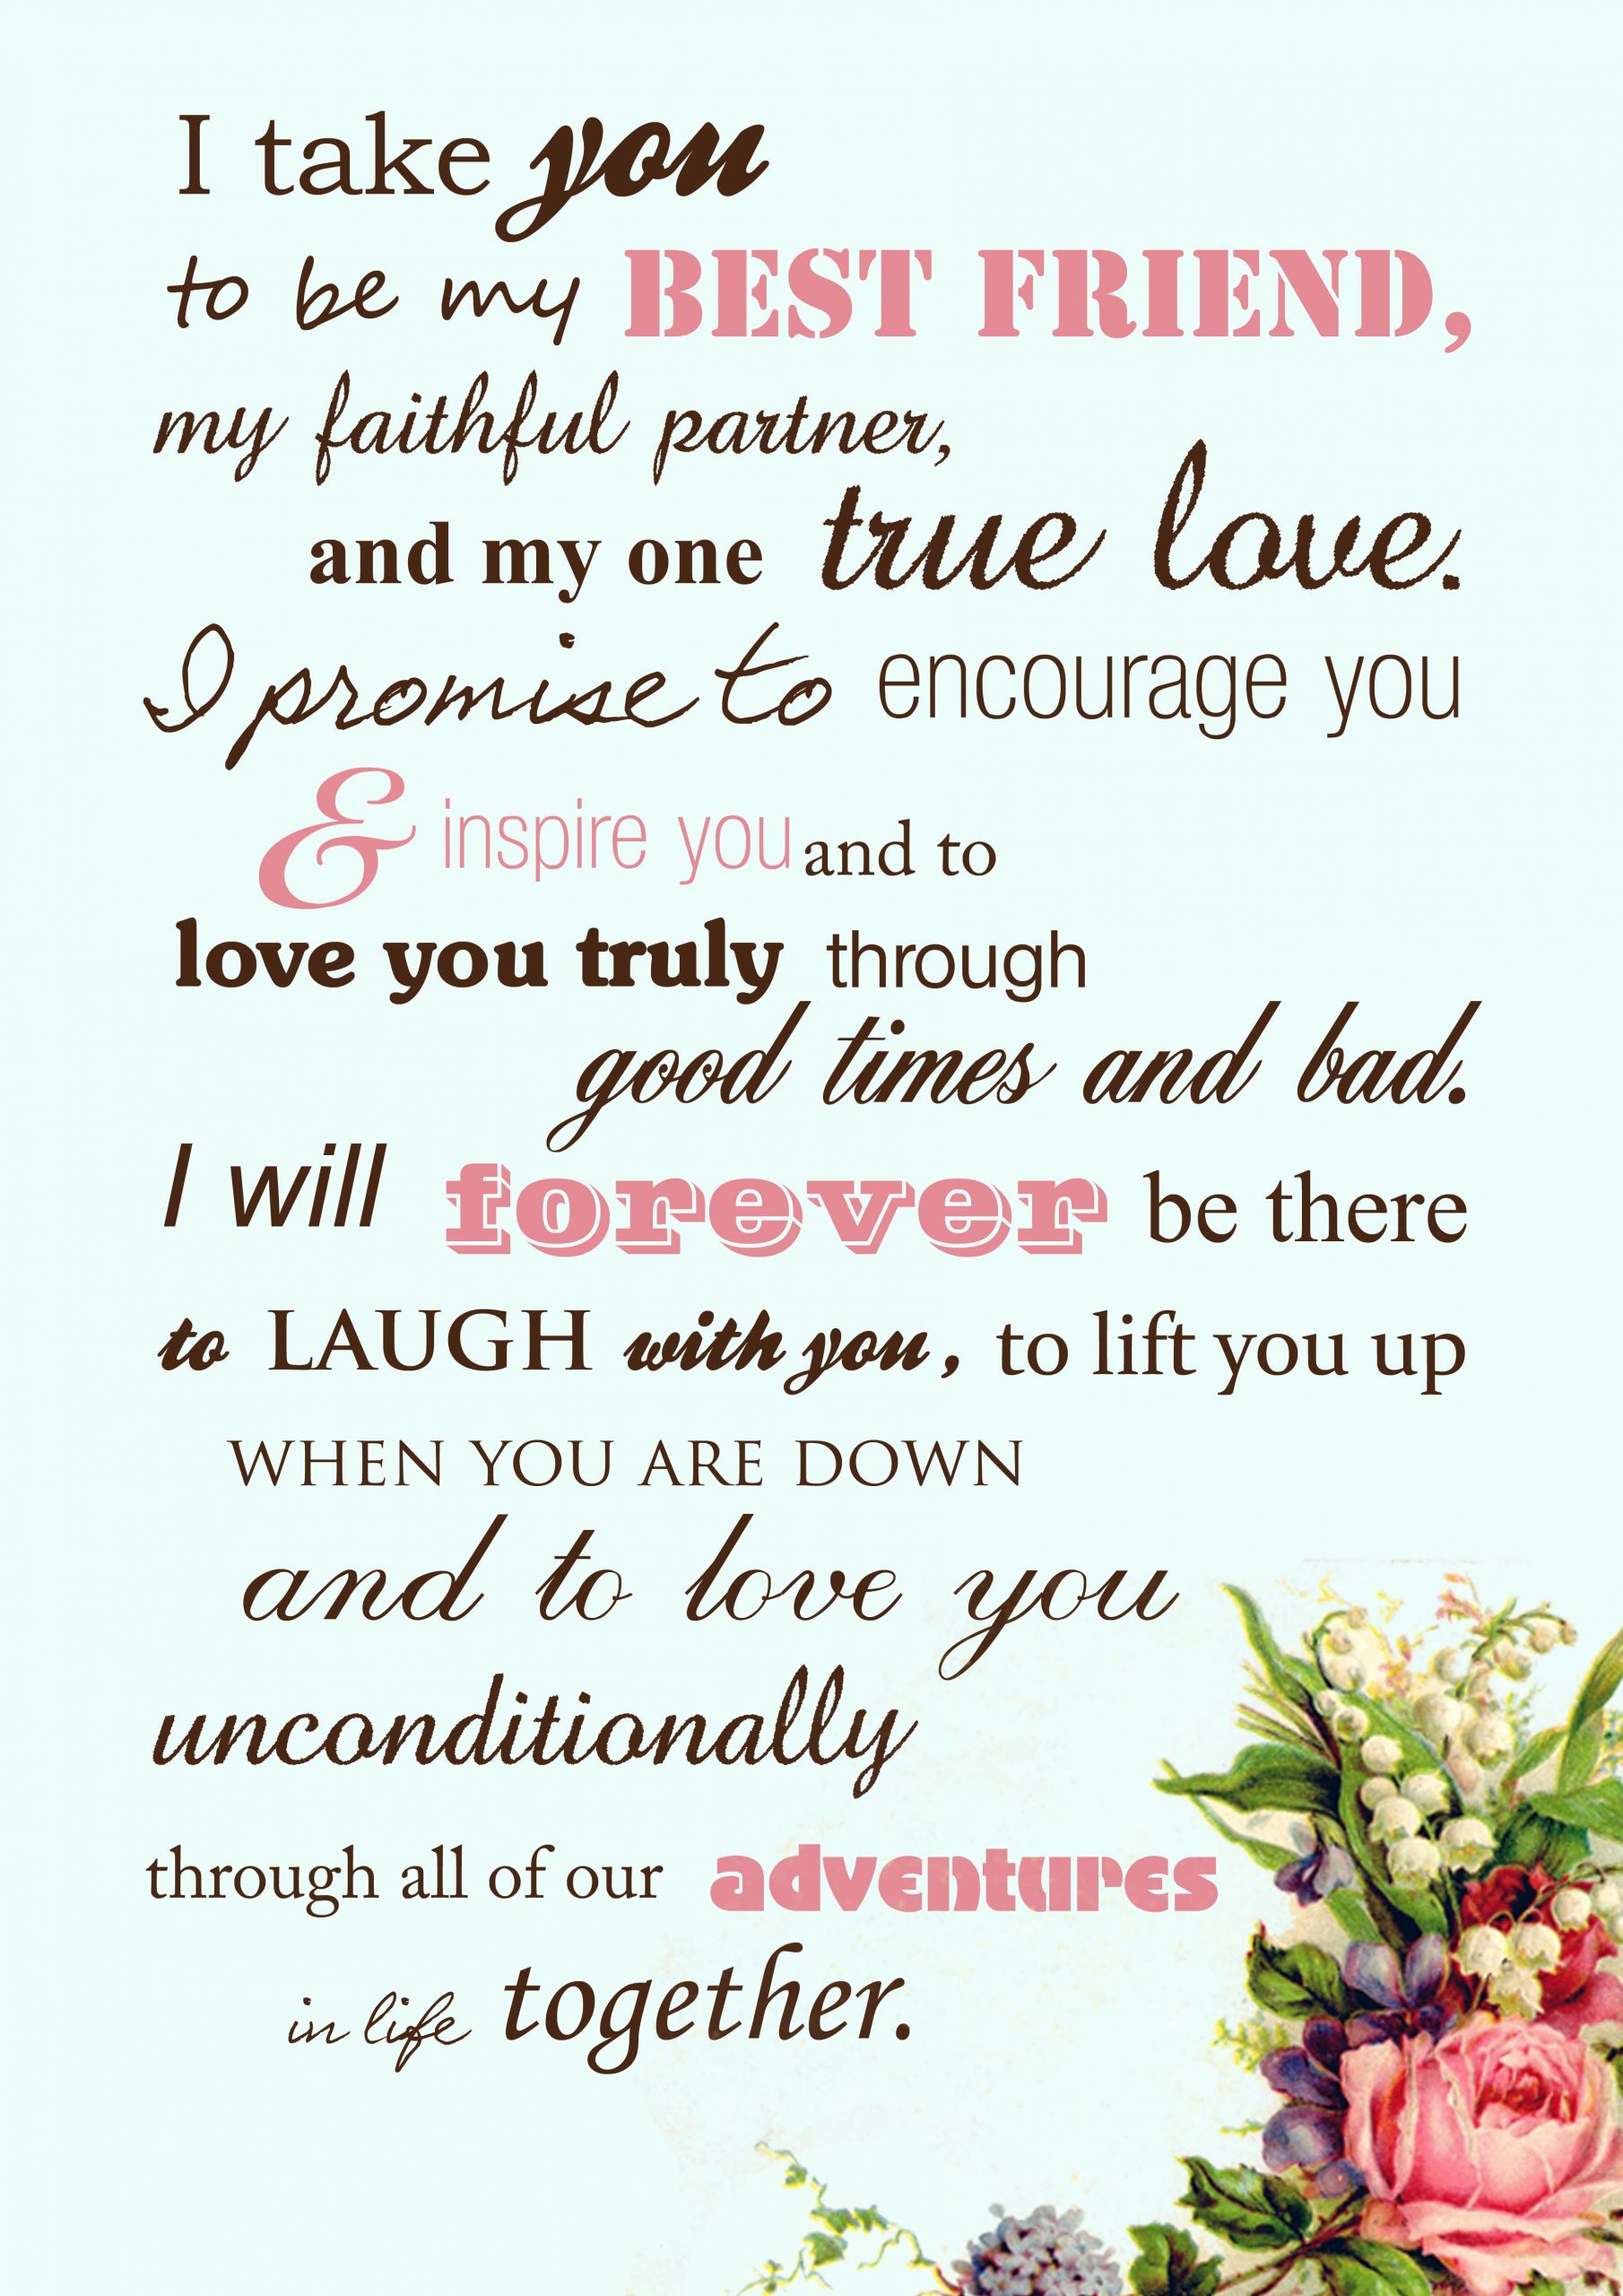 Traditional Vows For Wedding Ceremony
 Beautiful wedding vows instead of the traditional by the